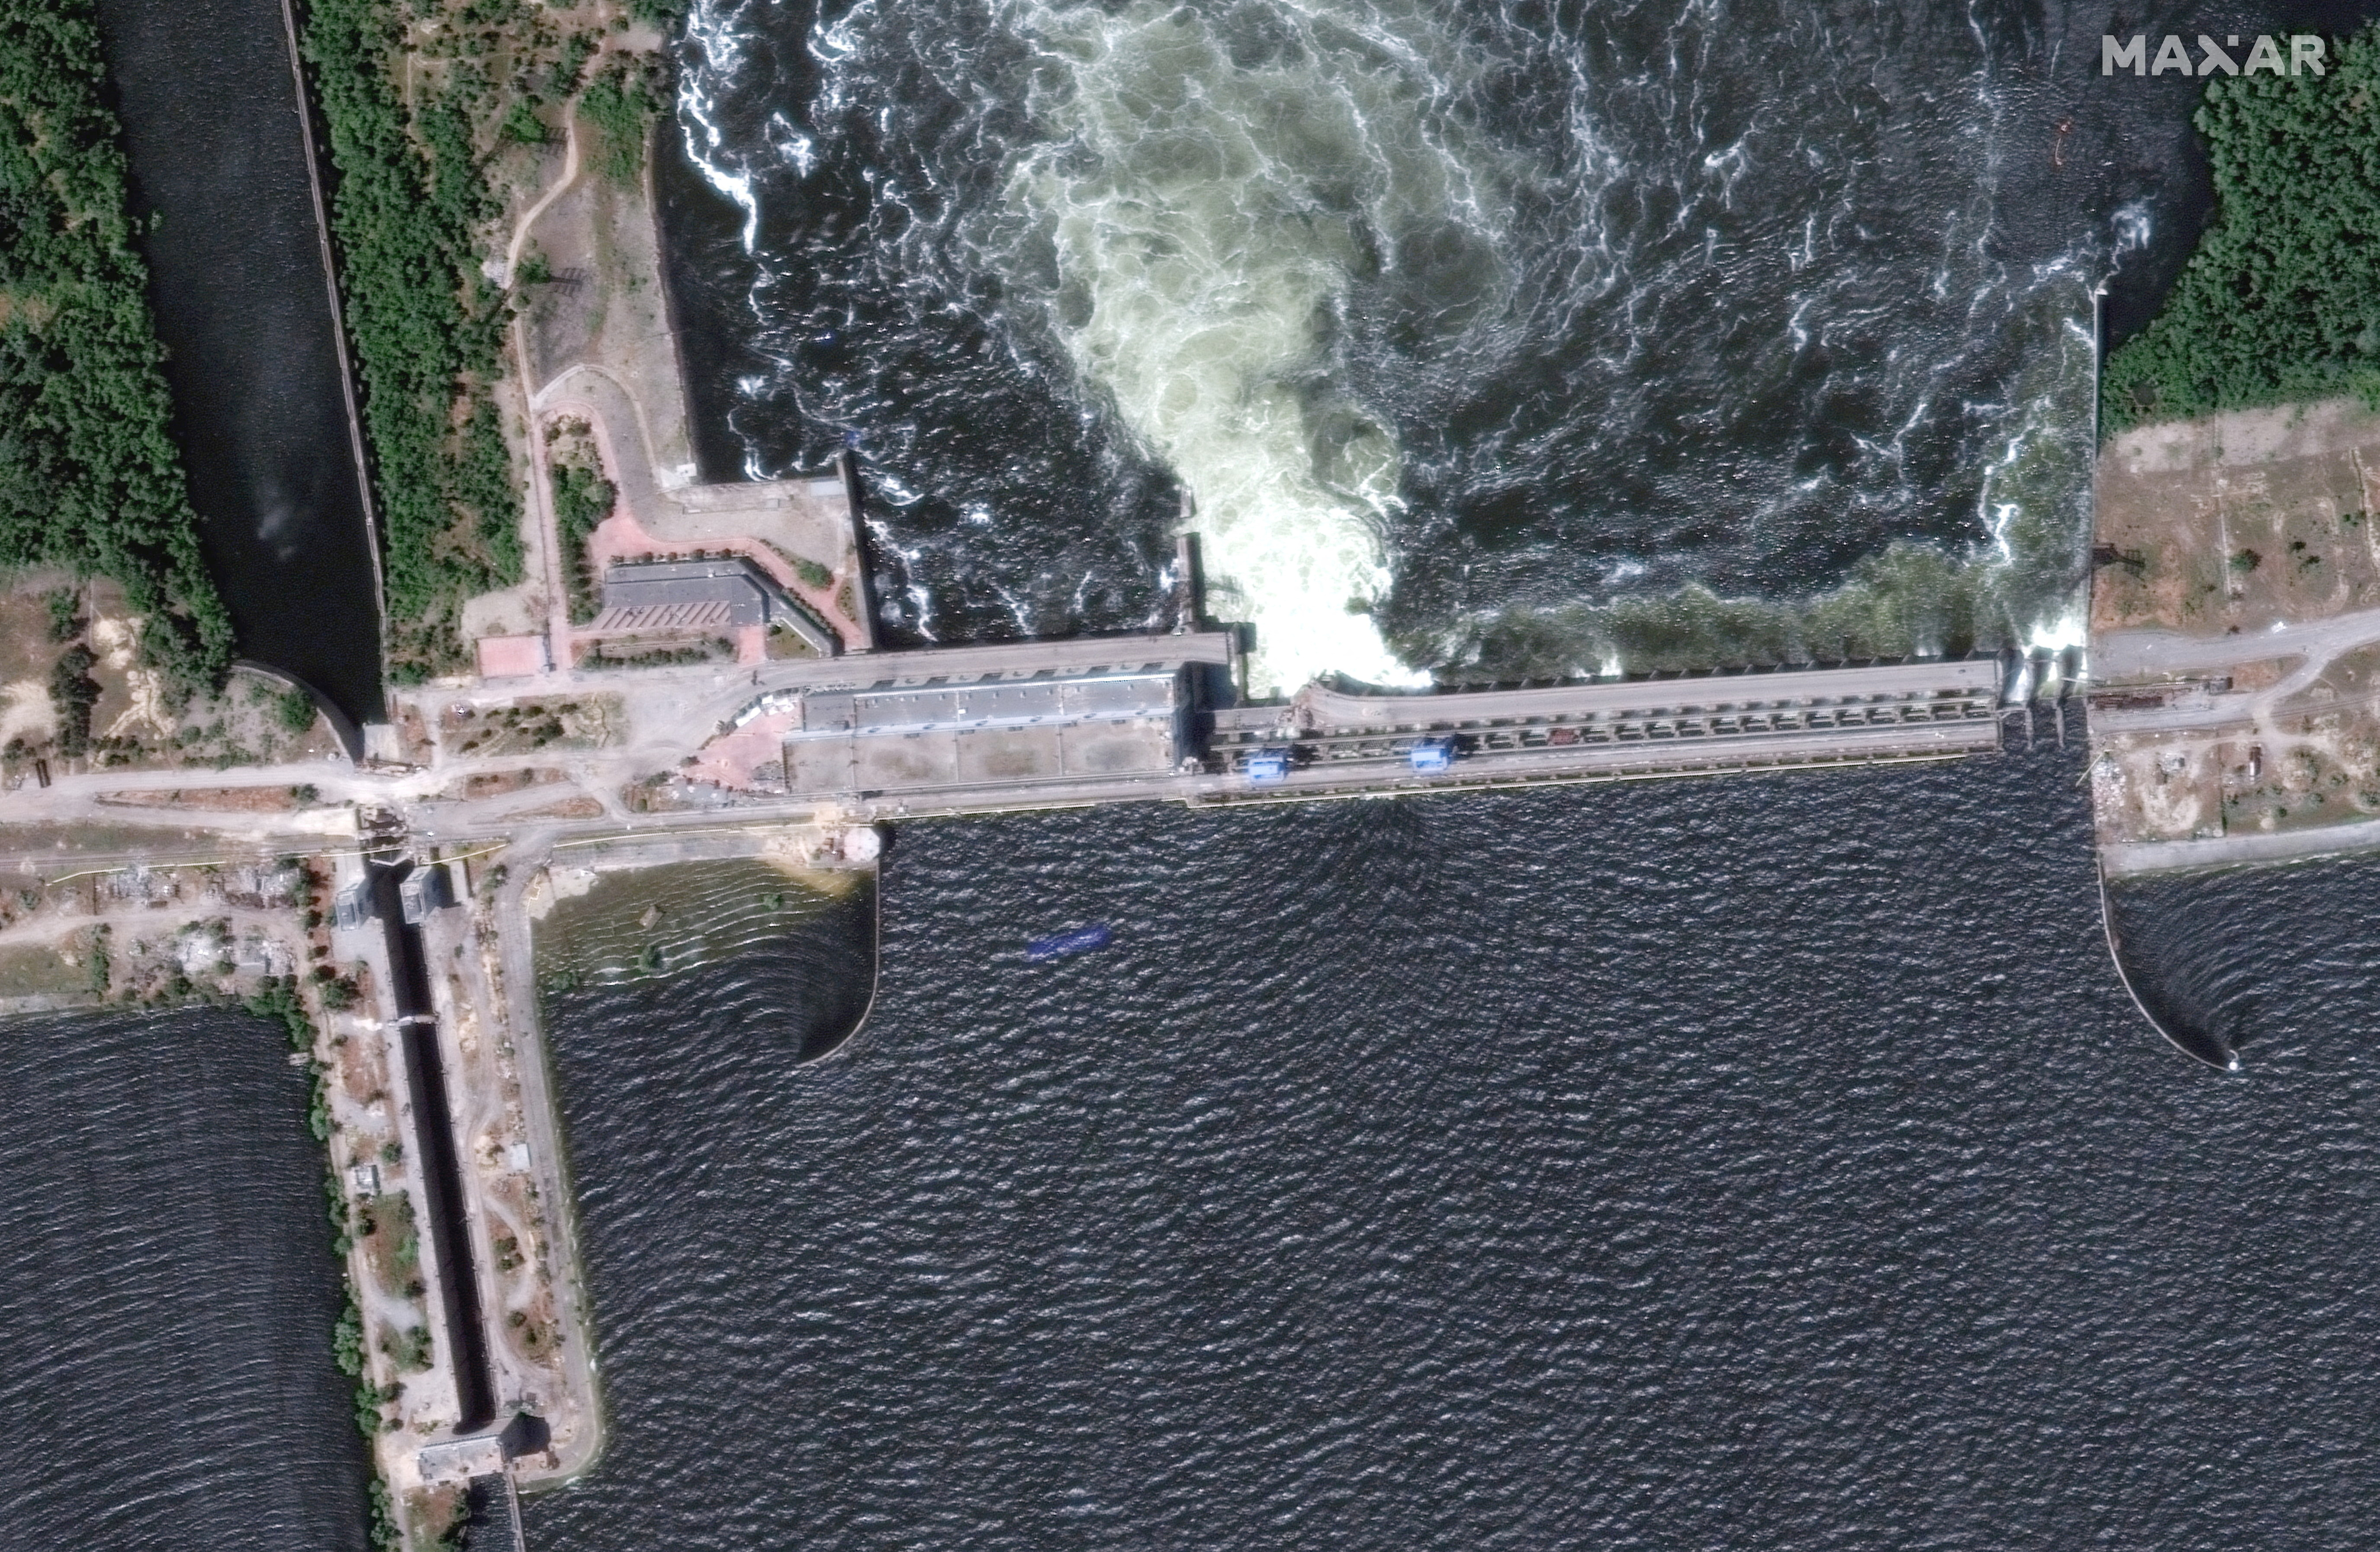 A satellite image shows extensive flooding along the Dnipro River